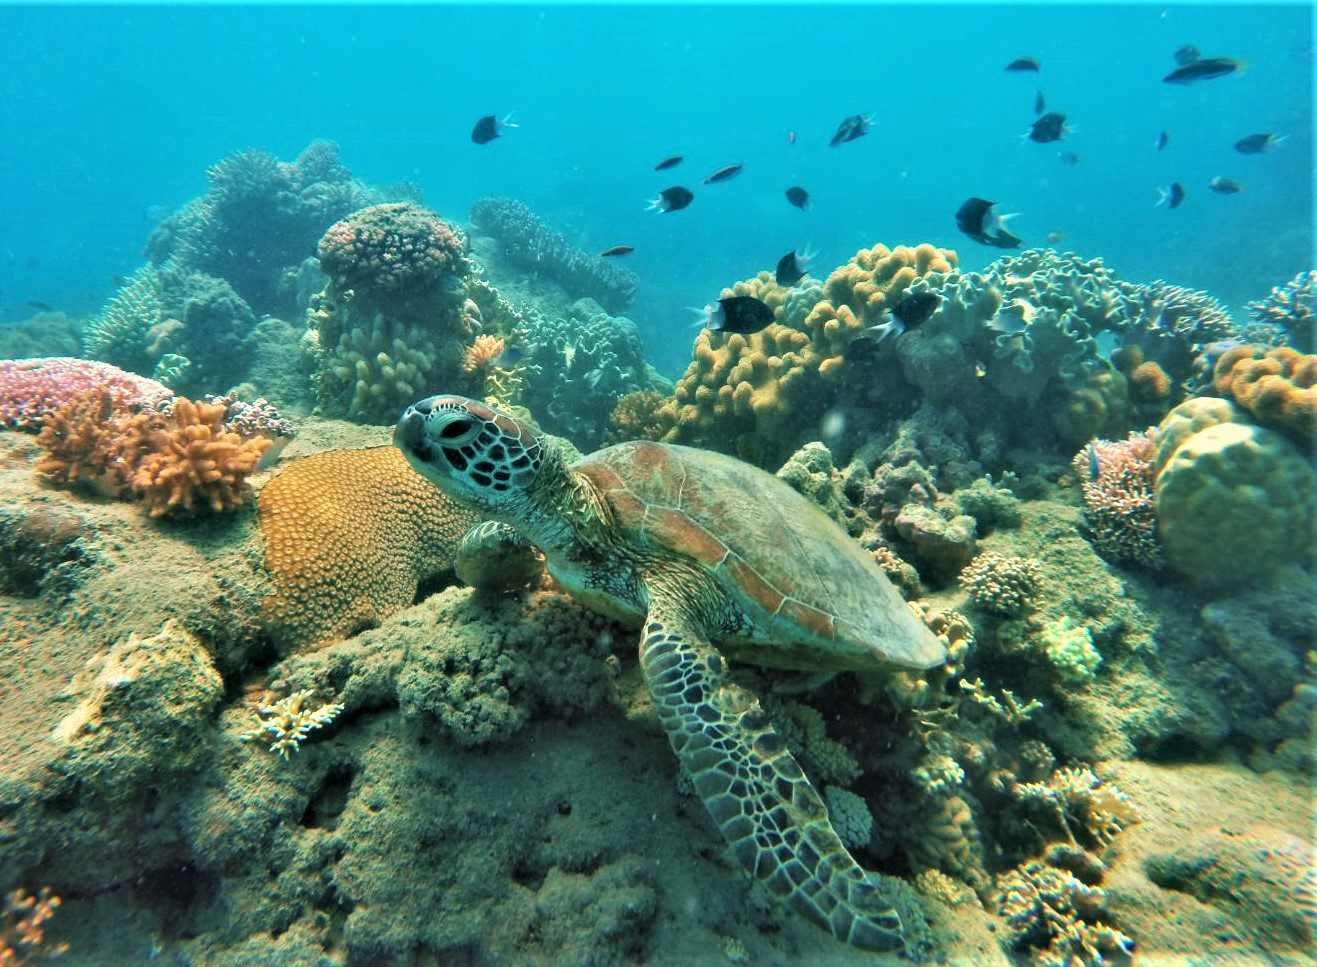 Deep under the ocean, a beautiful coral reef starring a green turtle. Fish swimming in the background.